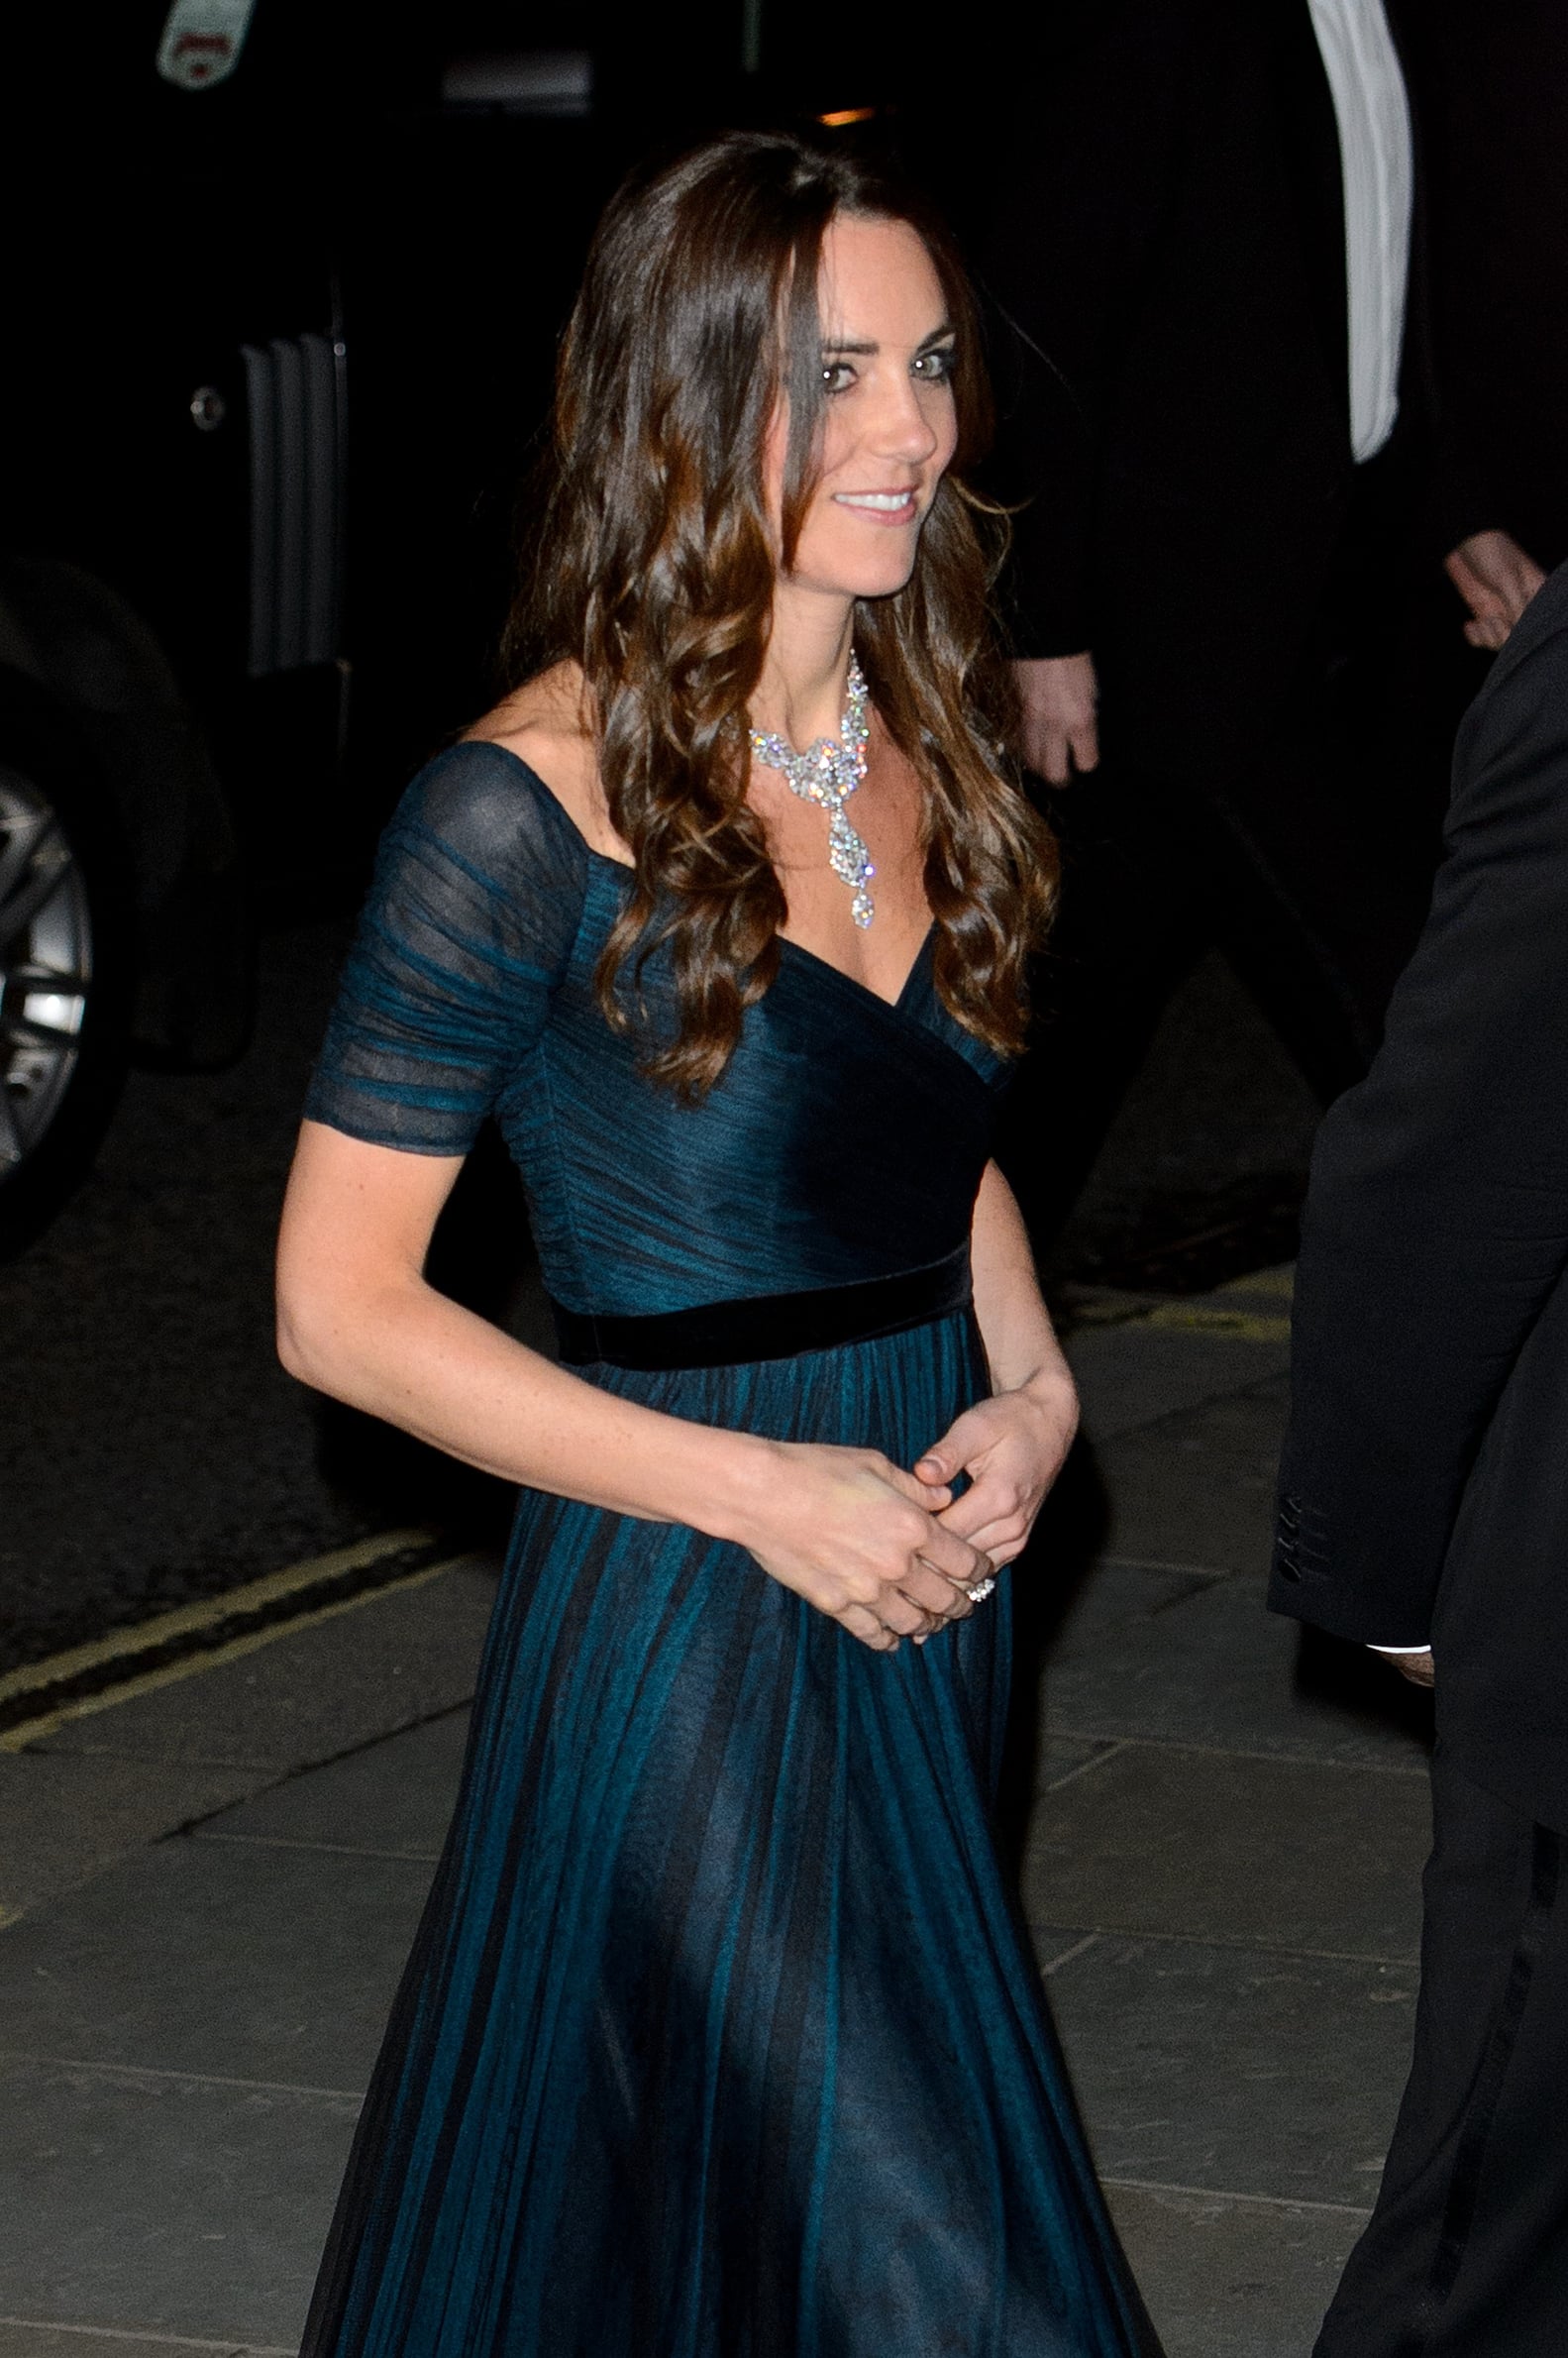 Kate Middleton Pictures Over the Years | POPSUGAR Celebrity